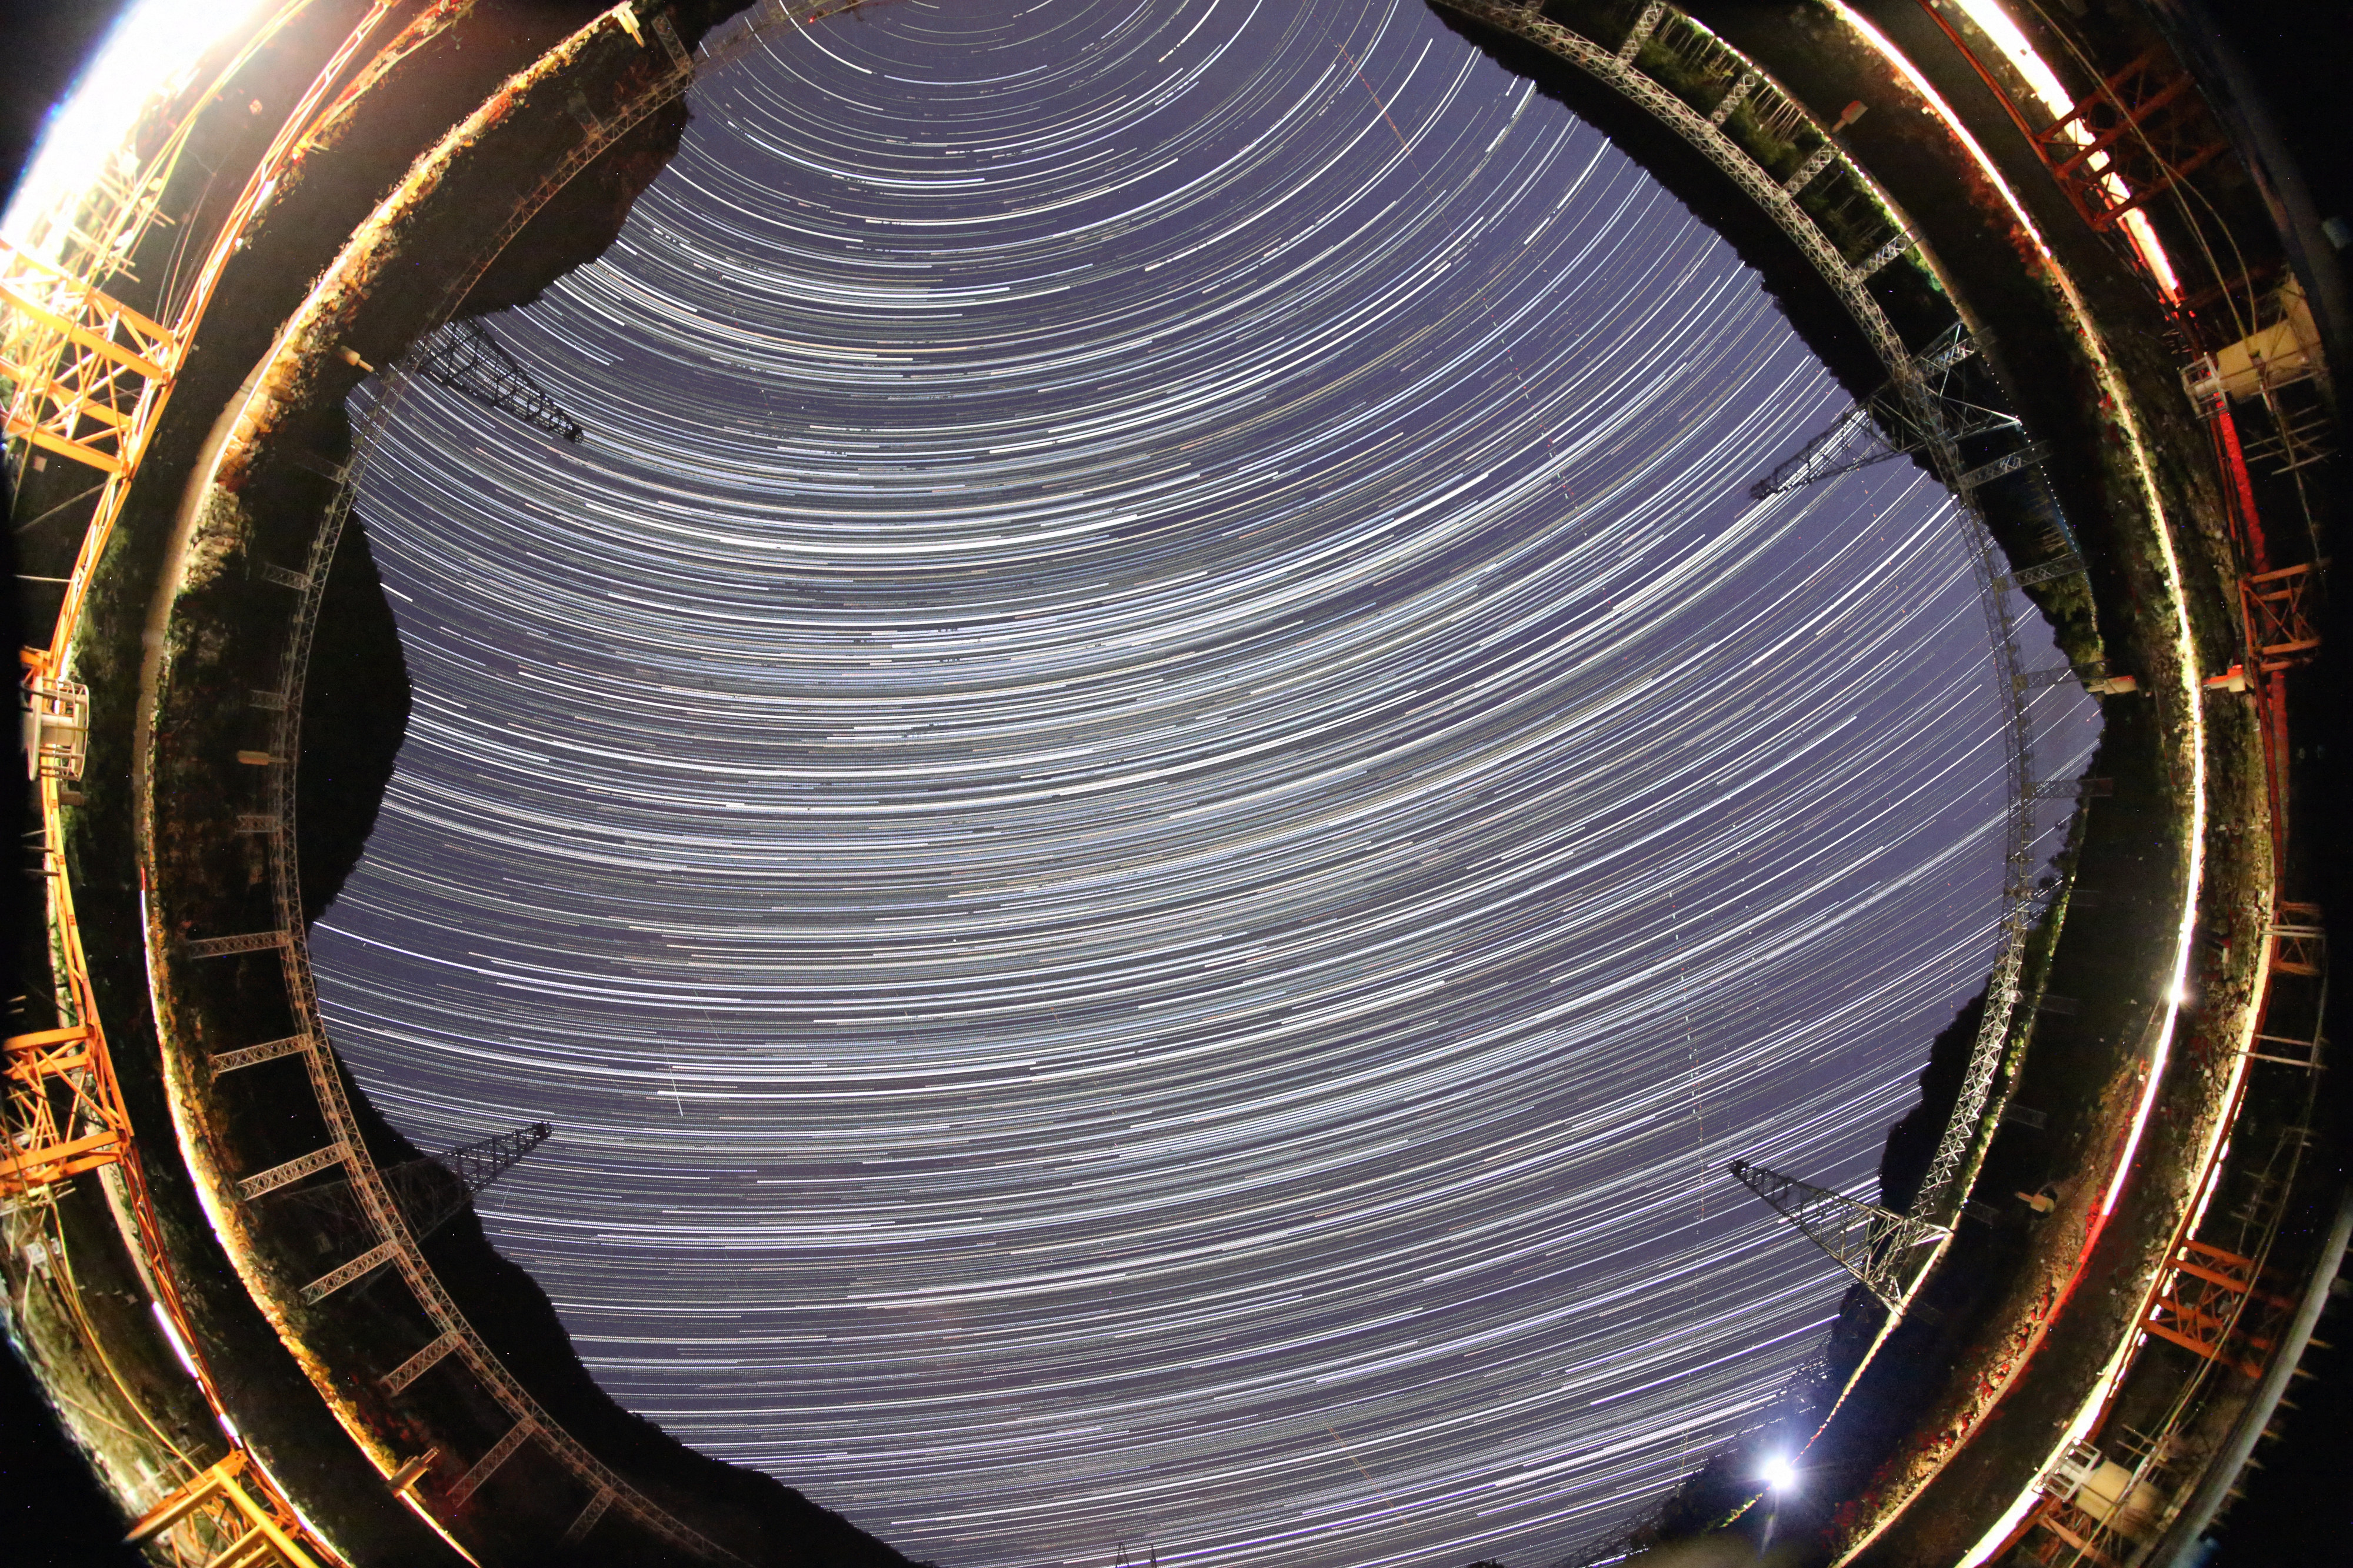 China’s FAST telescope helps find key evidence for the existence of nanohertz gravitational waves with its high sensitivity. Photo: National Astronomical Observatories of China.